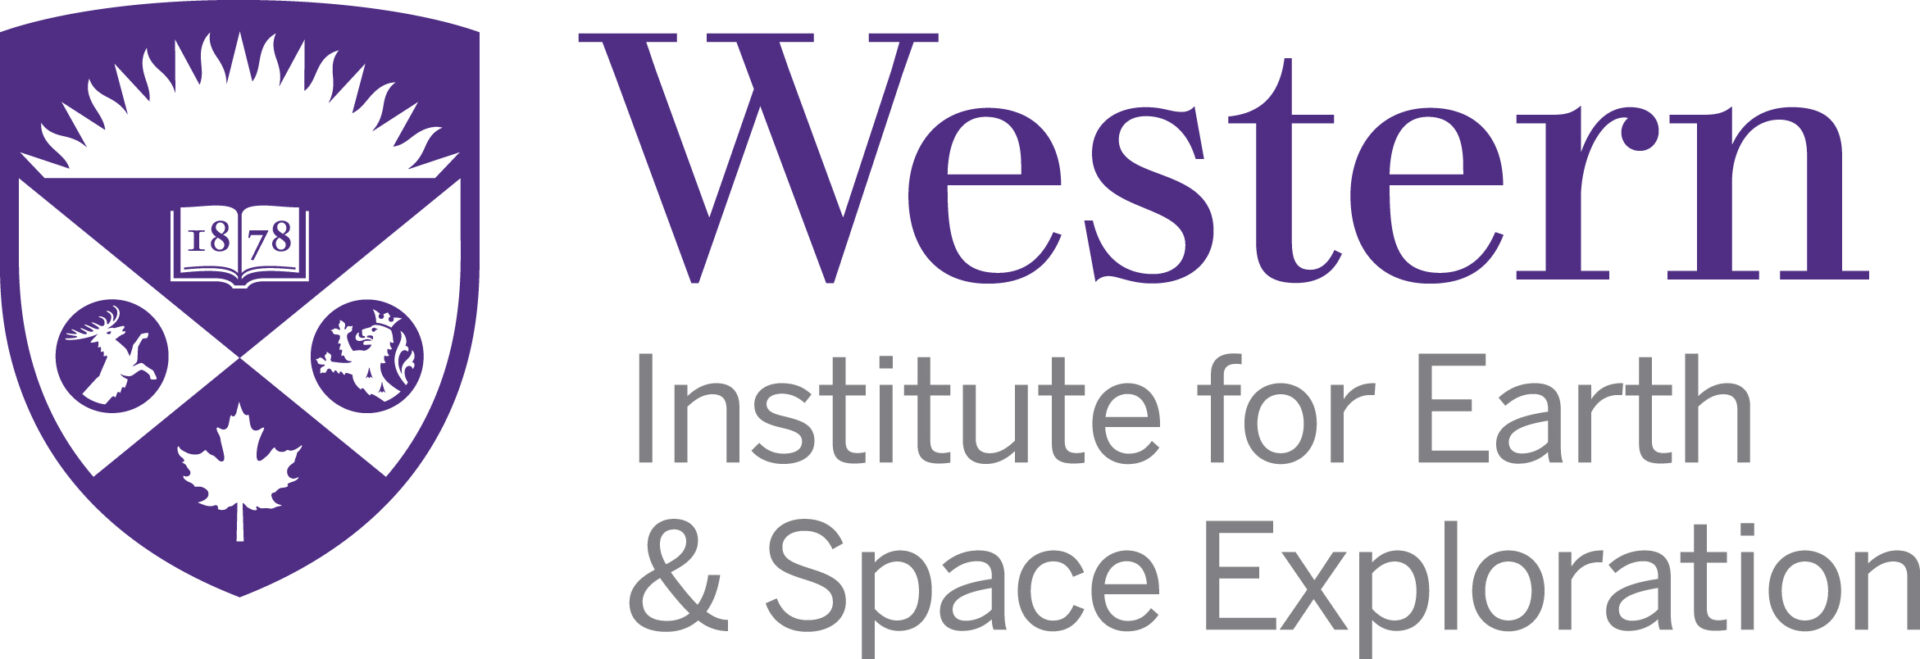 logo for Western University Institute for Earth & Space Exploration